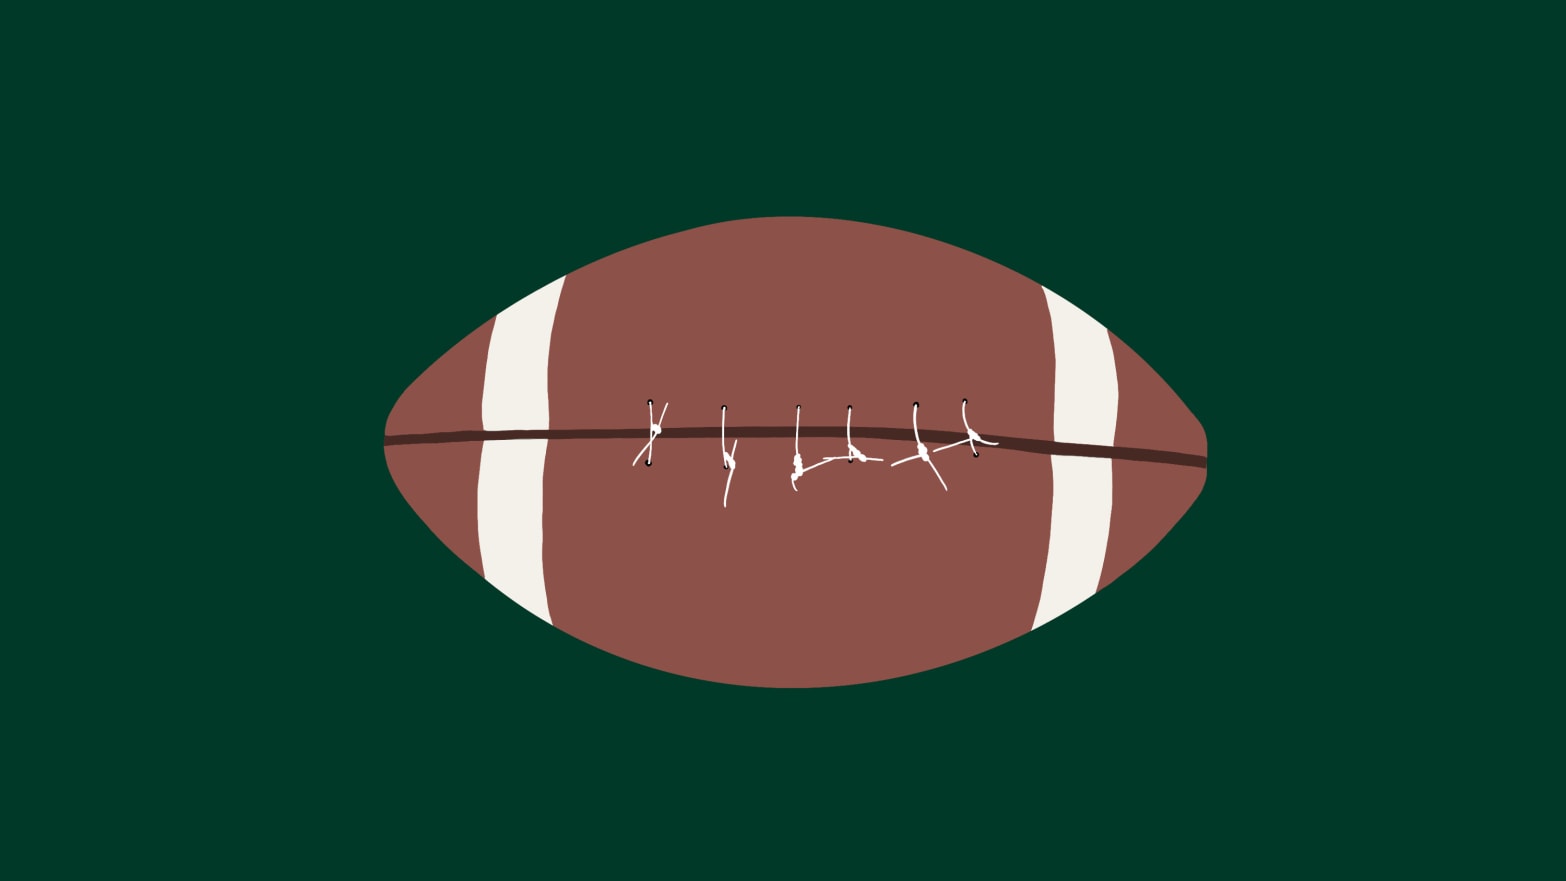 Illustration of a football with medical stitches on a green background